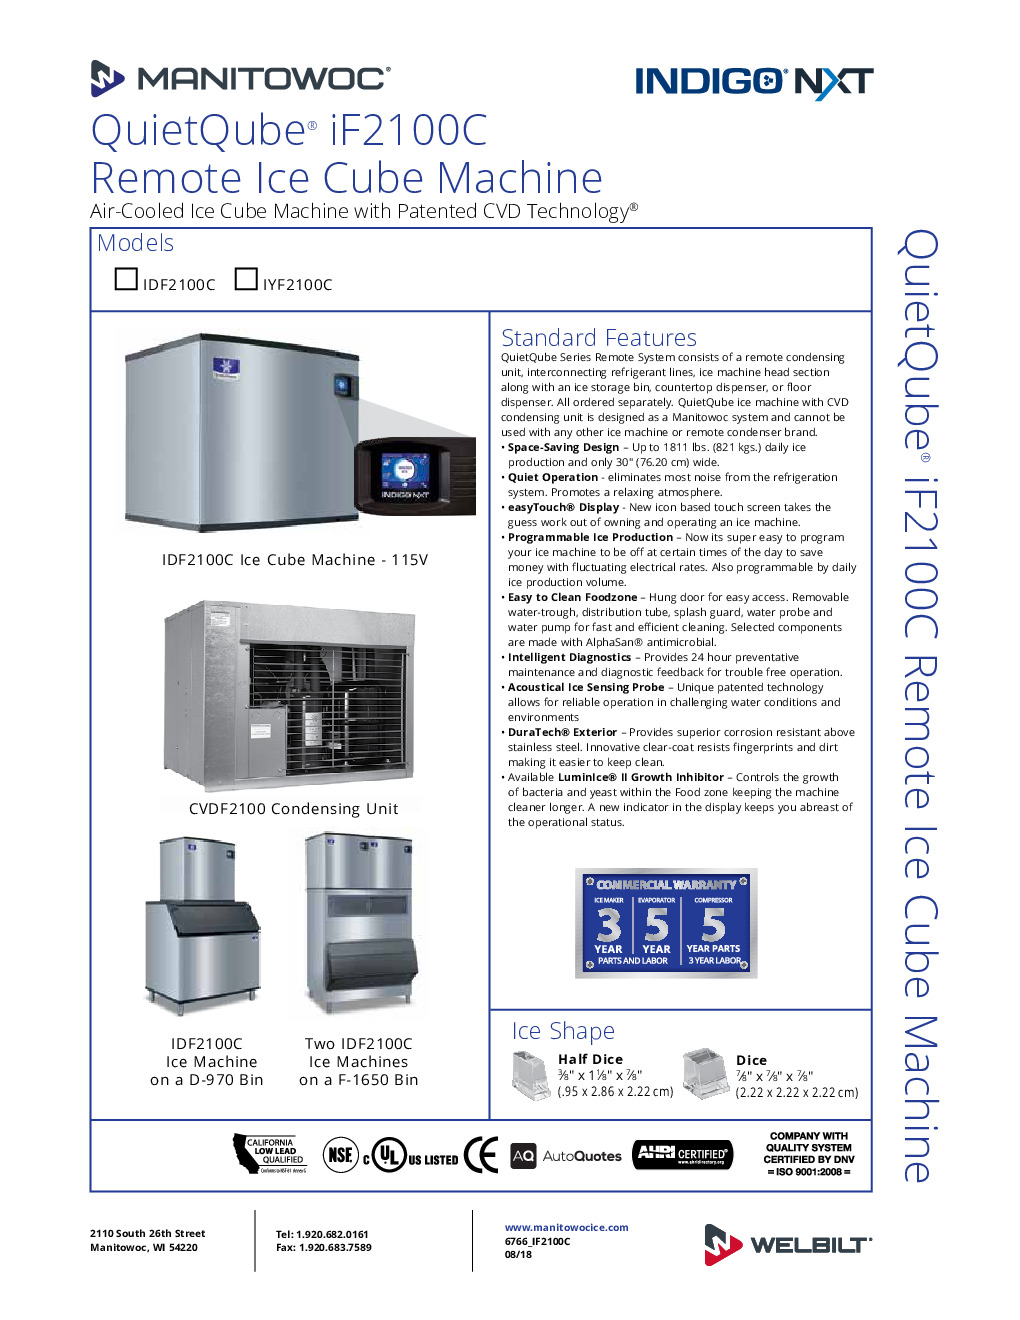 Manitowoc QuietQube IYF2100C Cube Ice Maker w/ 1811 lbs/Day, Air-Cooled, Half-Dice Size